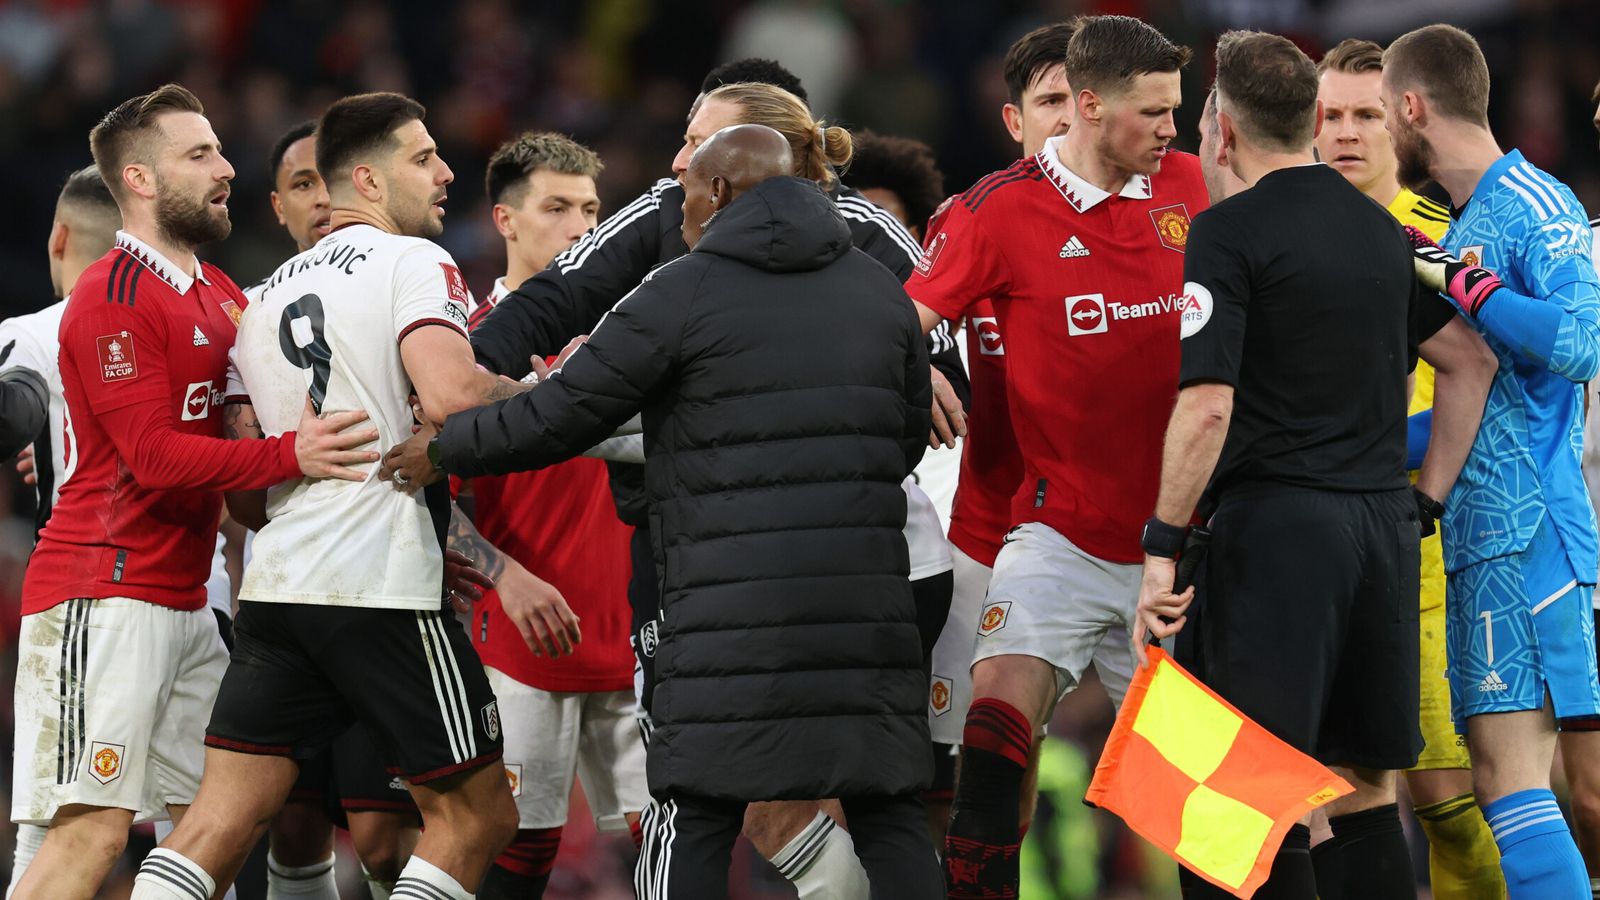 FA Cup: Red Cards Galore With Manchester United Semi-Finalists